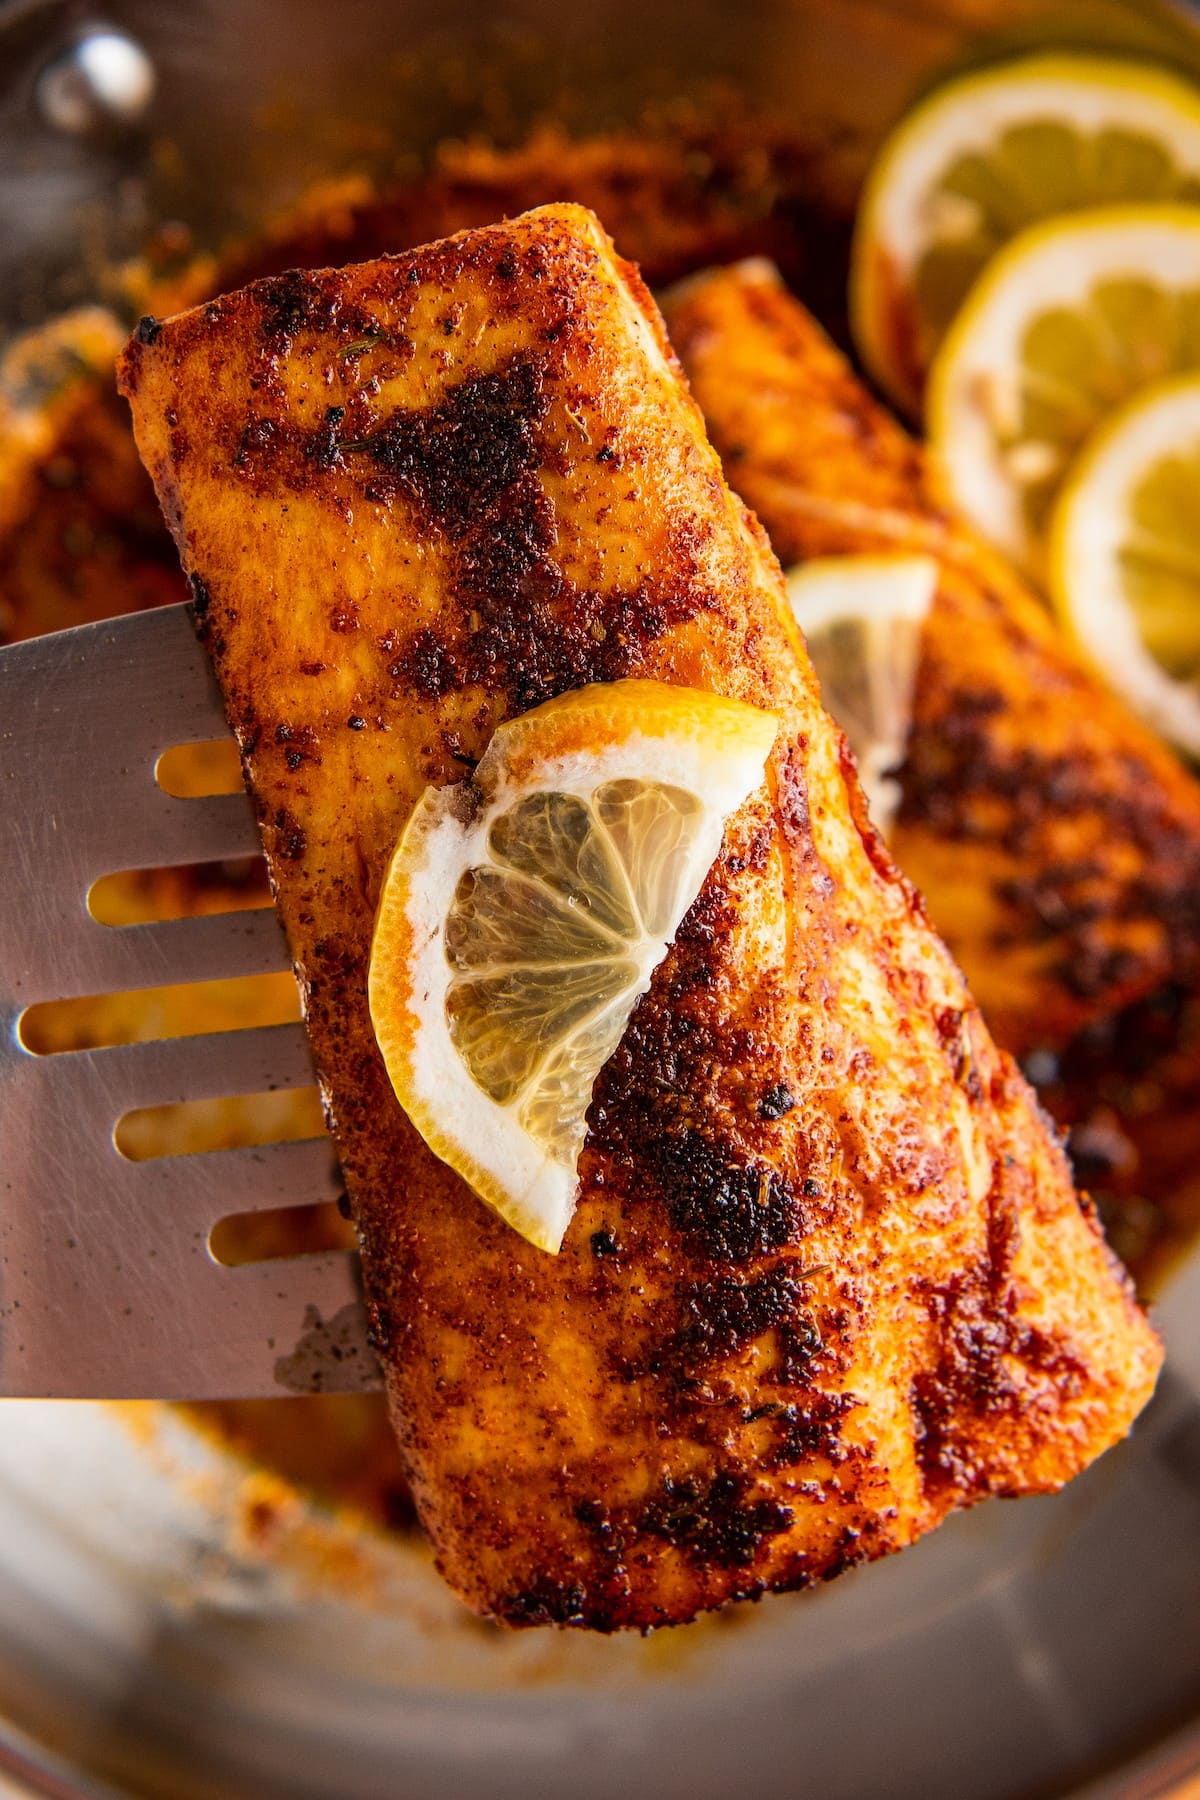 A blackened mahi mahi fillet on a spatula, topped with lemon, with more pieces in the background